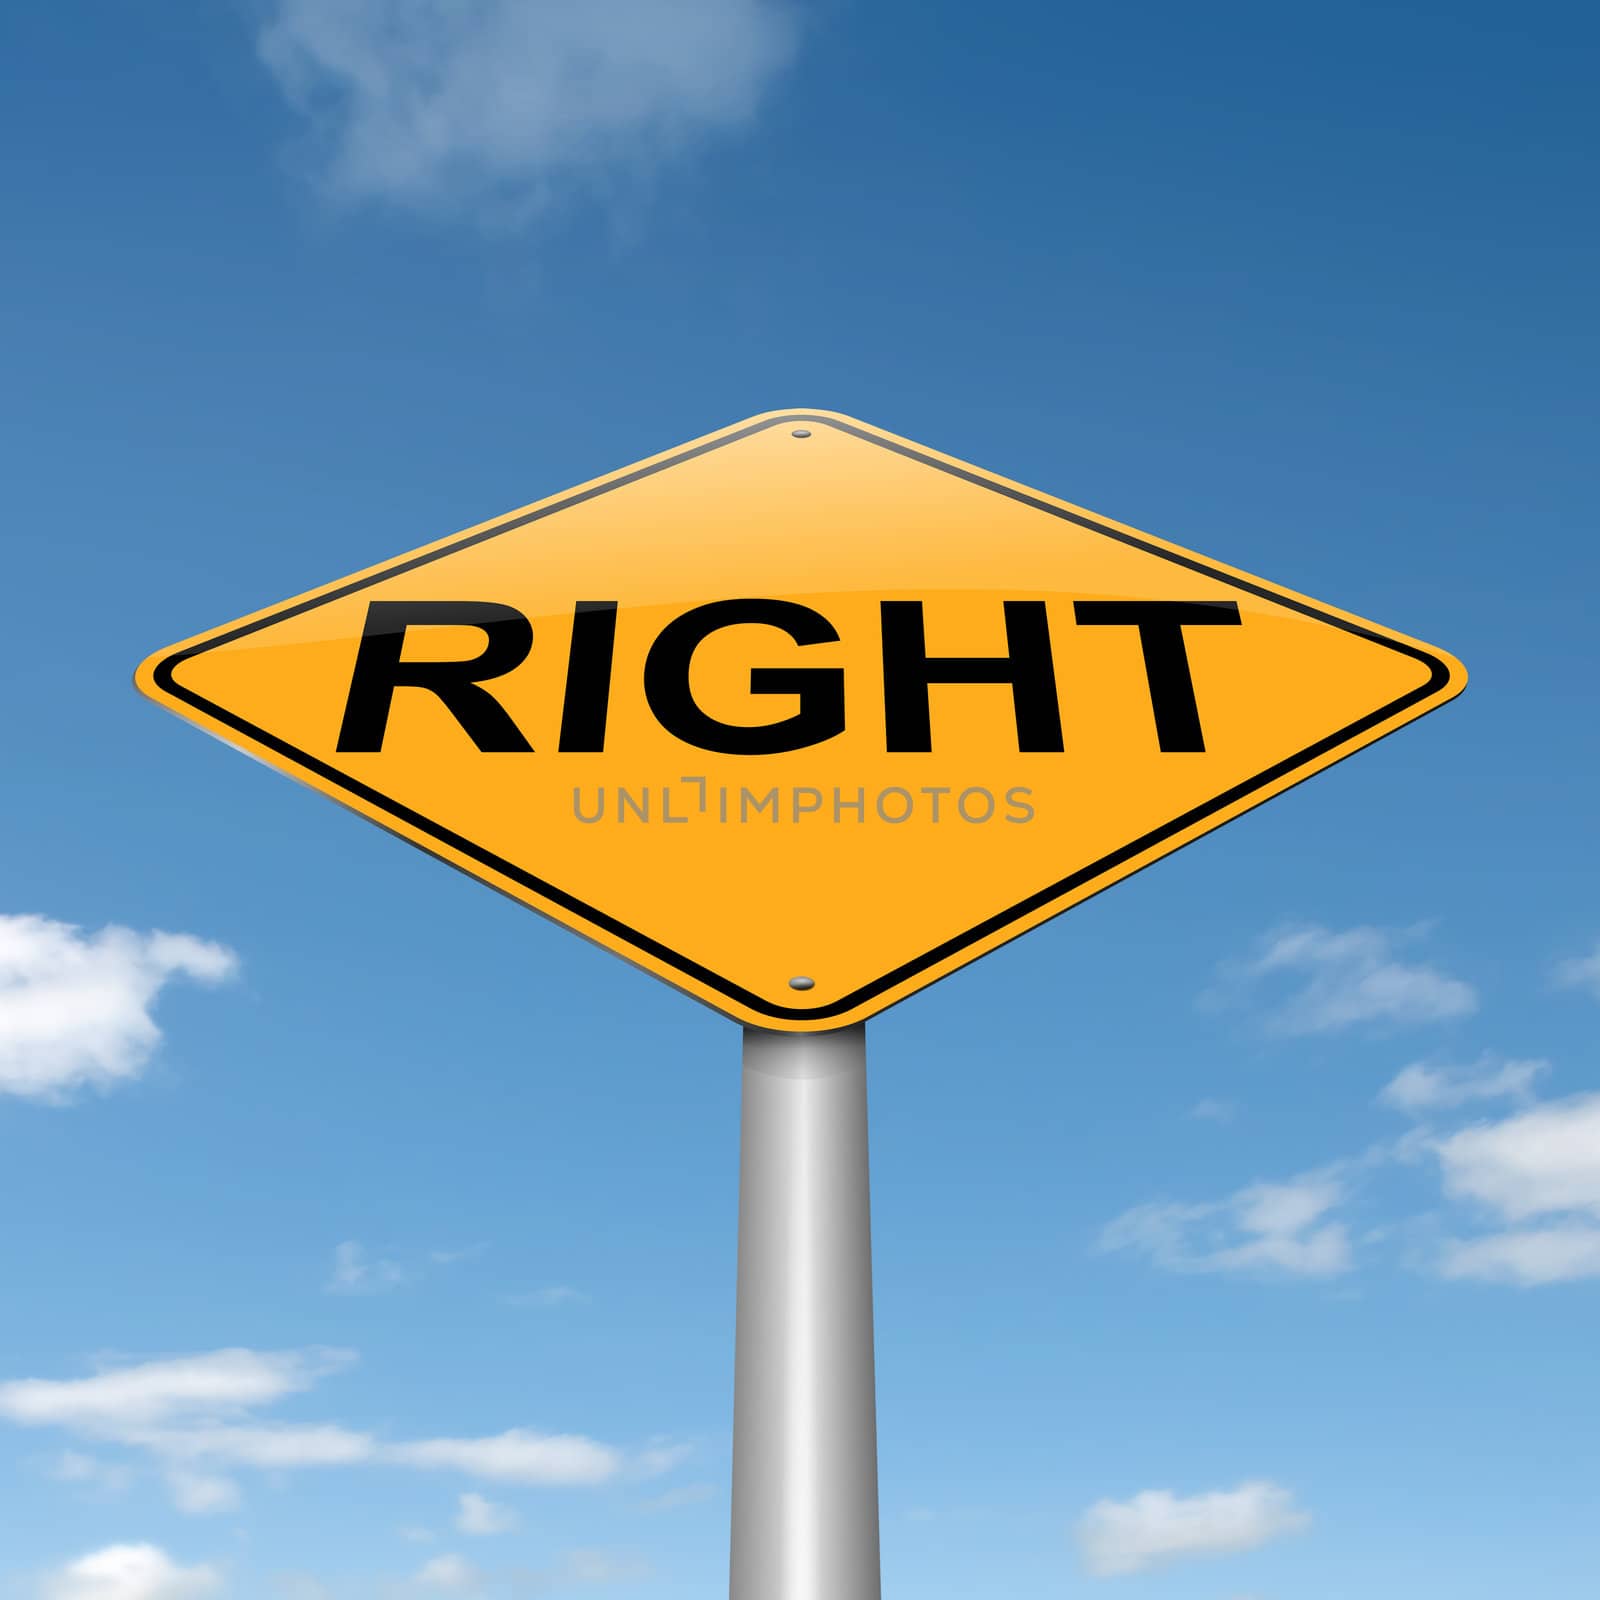 Illustration depicting a roadsign with a right concept. Blue sky background.